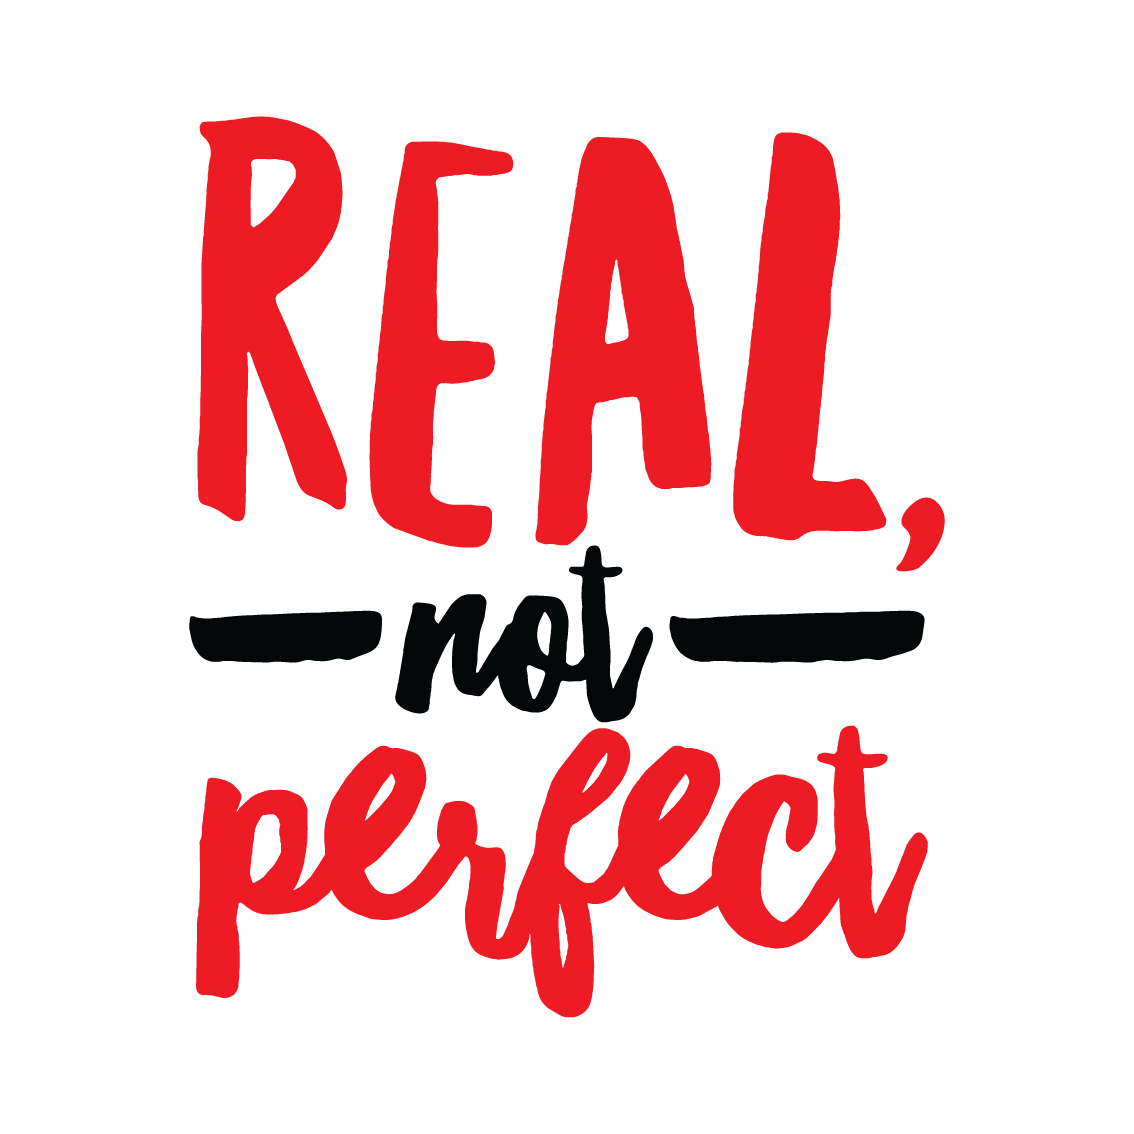 REAL, NOT PERFECT